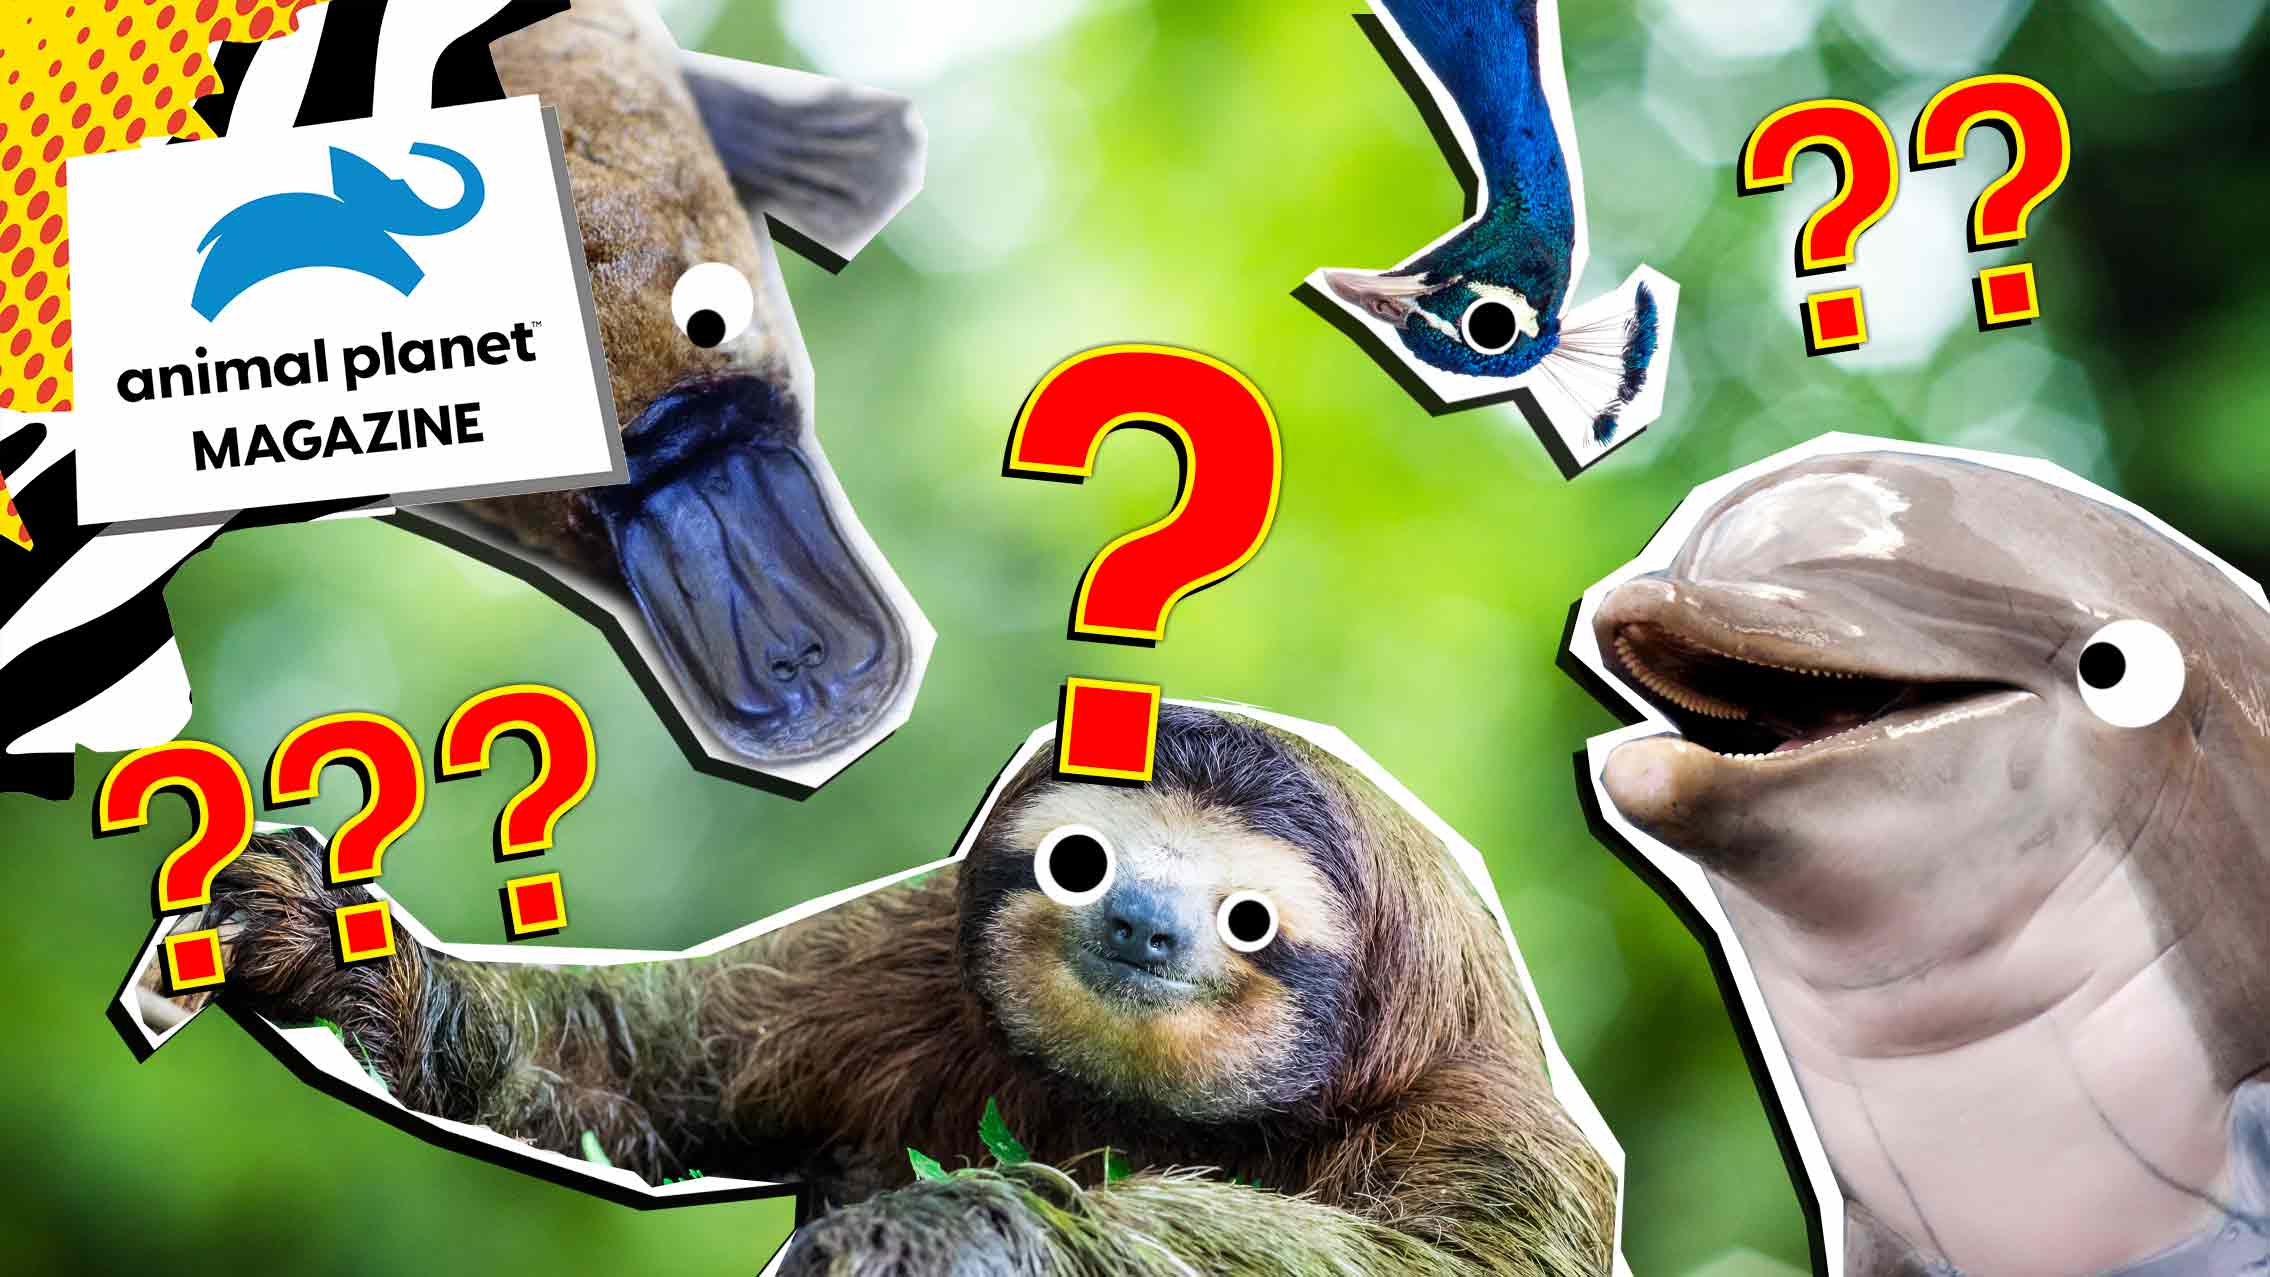 Animal Quizzes | Animal Questions With Answers | Beano.com